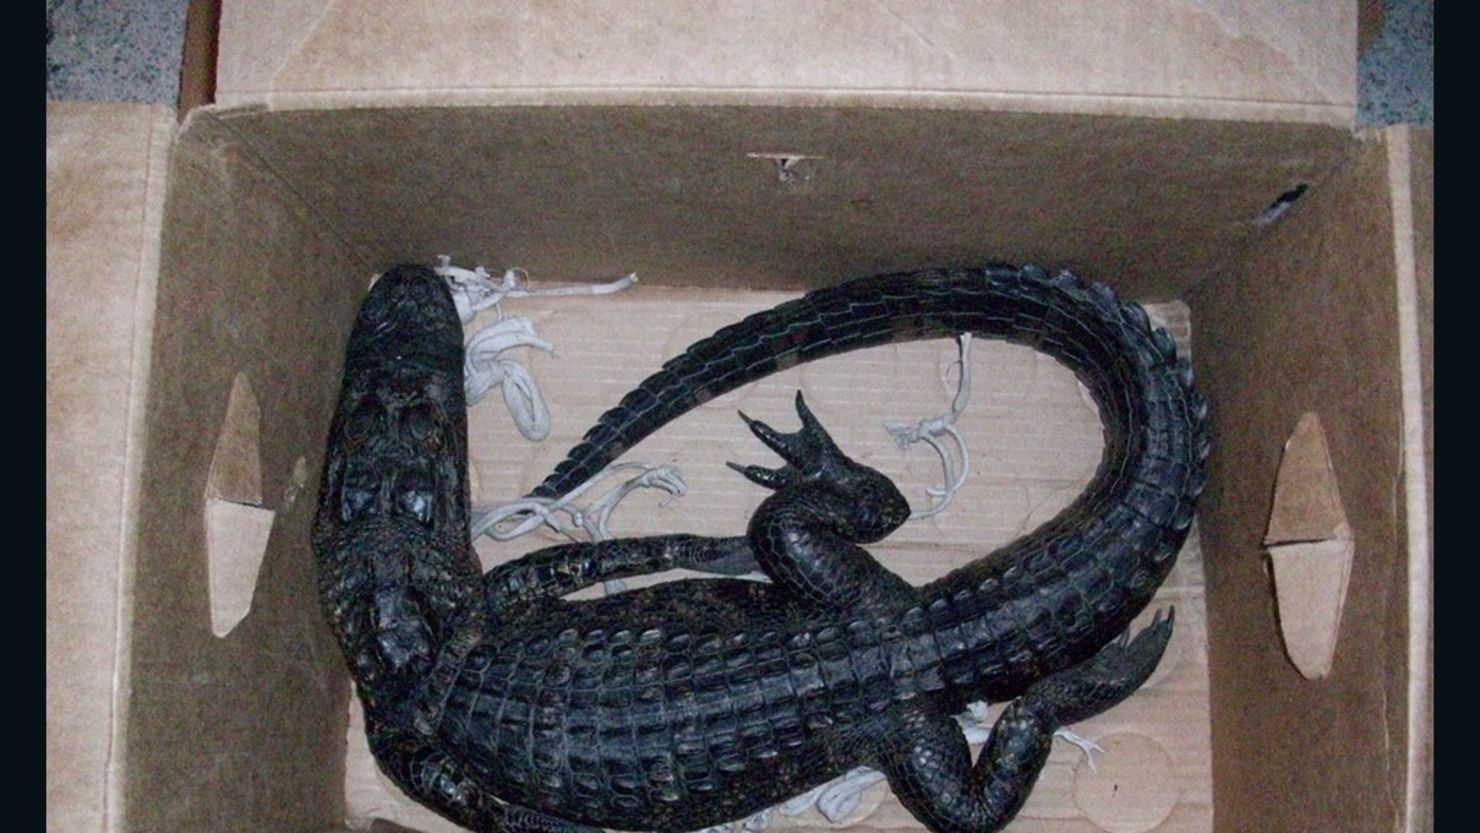 A Florida man attempted to trade this 4-foot alligator for a 12-pack of beer